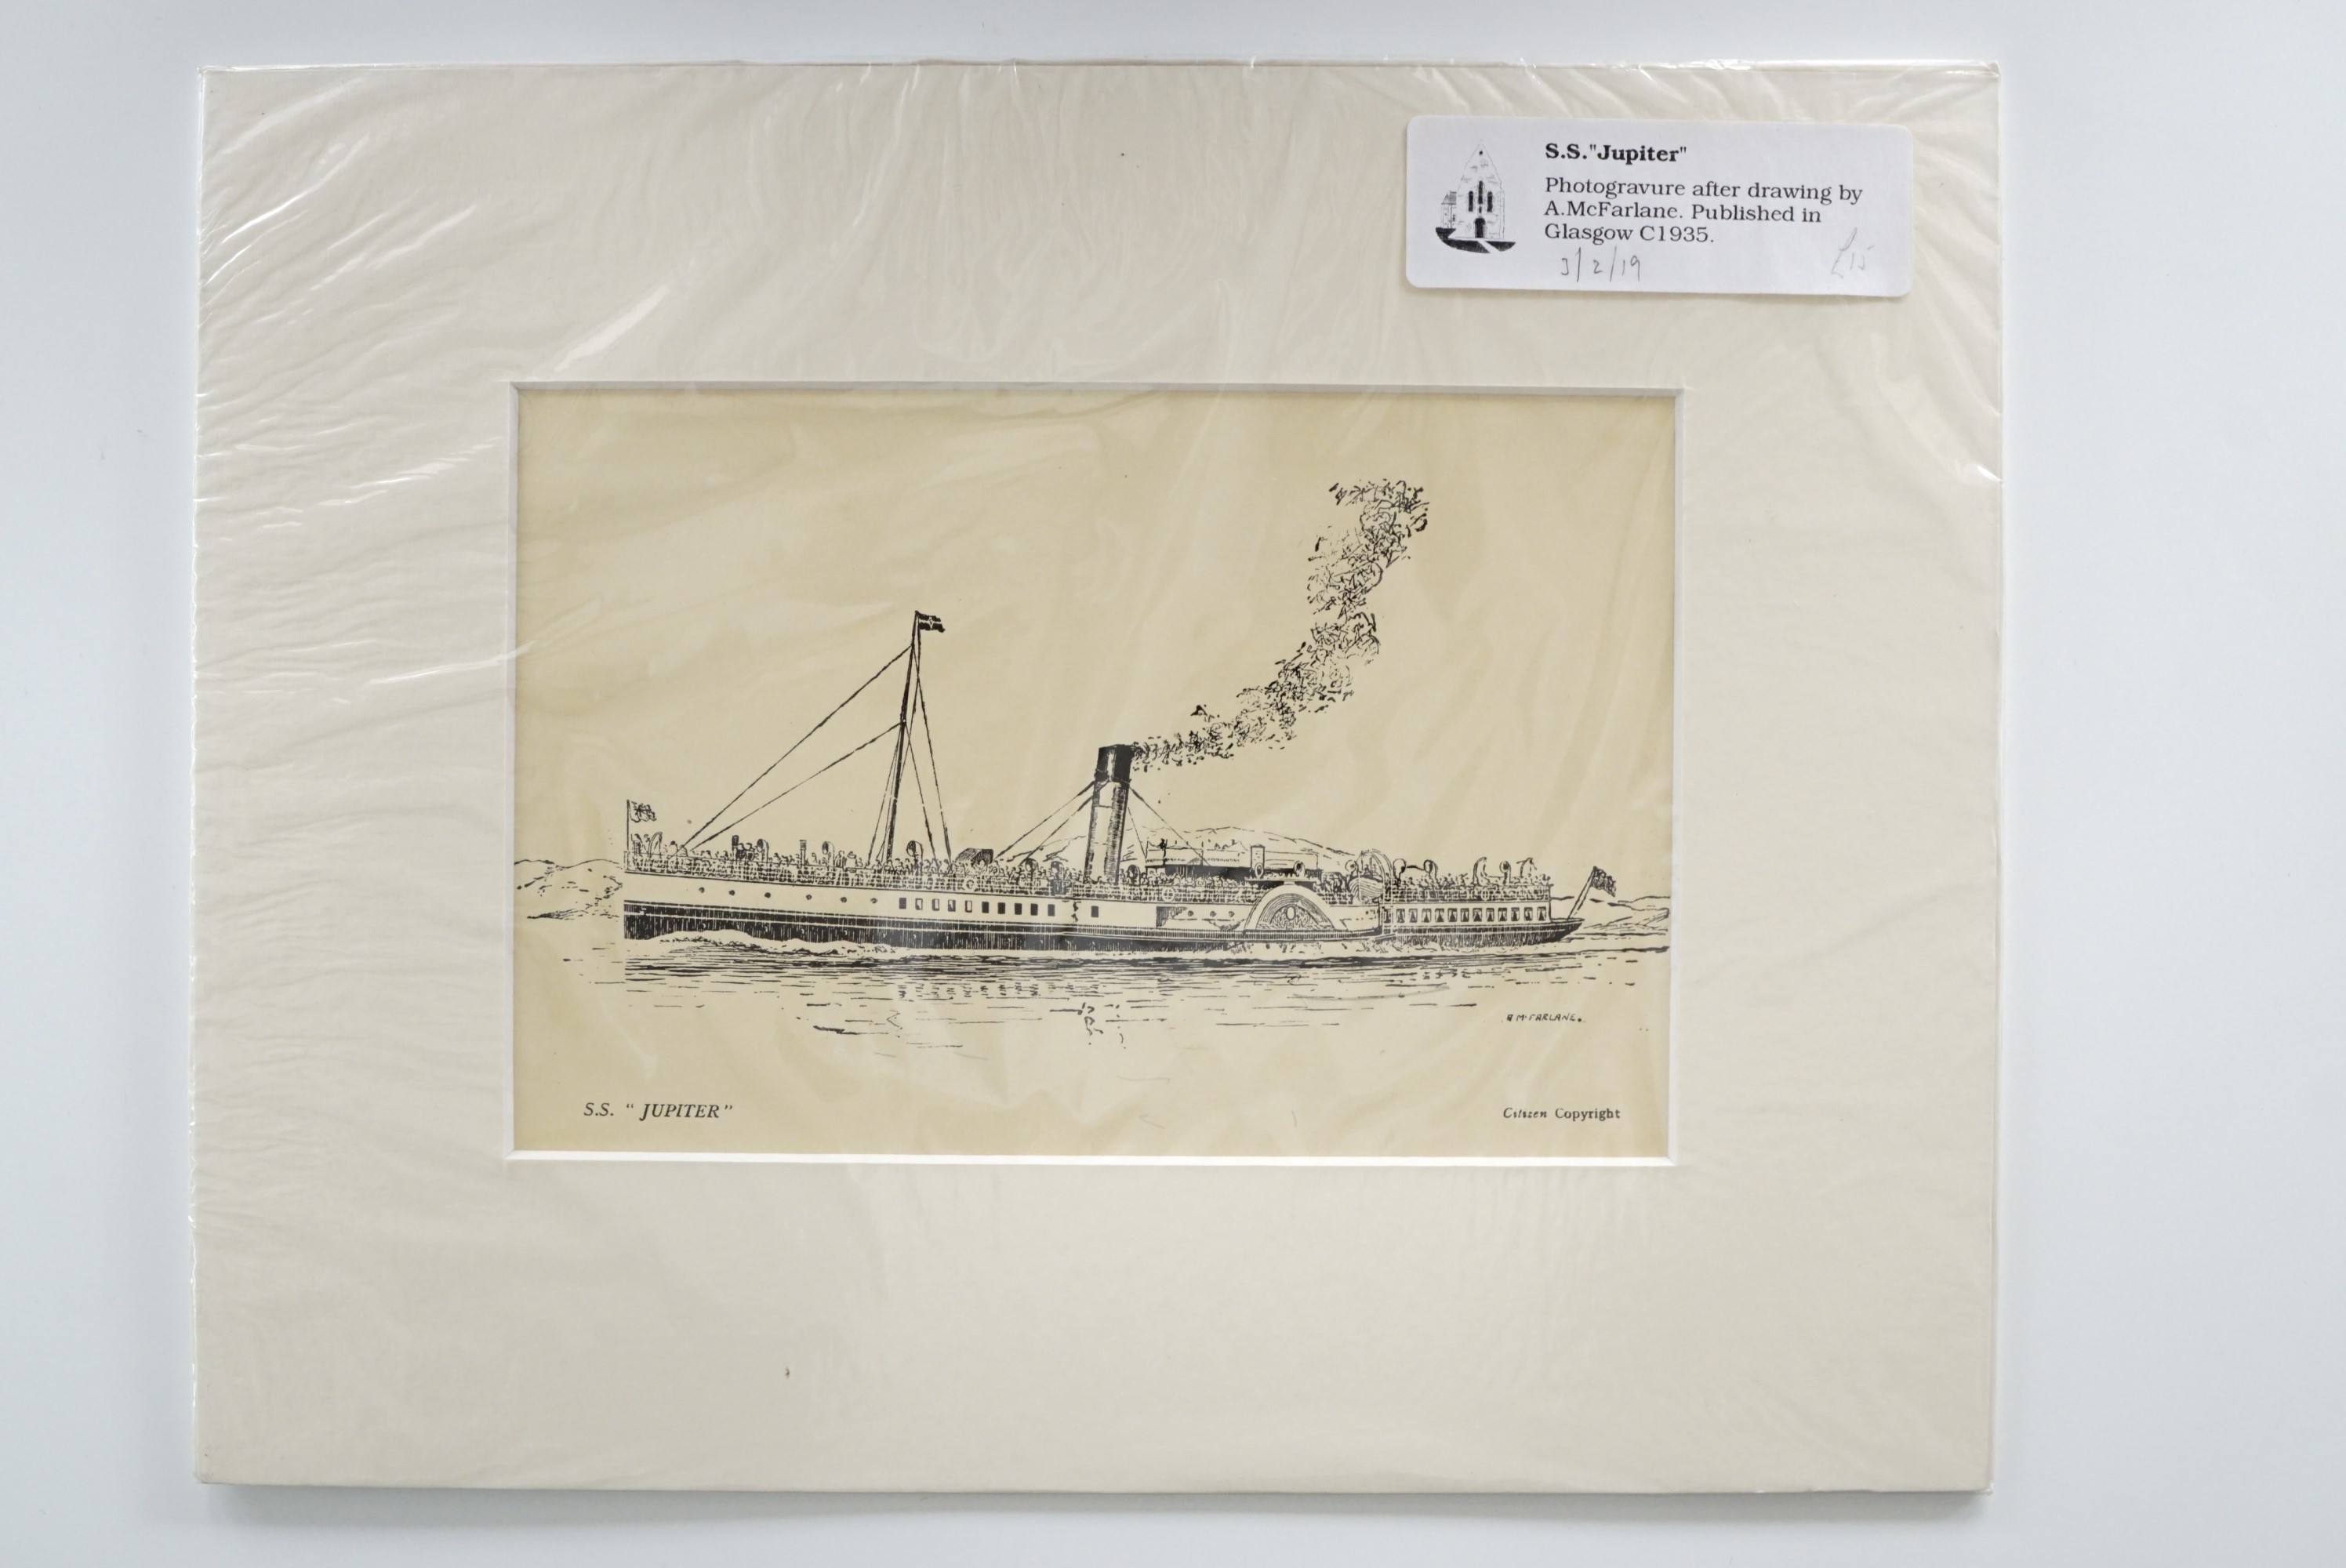 After A McFarlane (20th Century) A series of seven photogravure prints depicting cruise ships, - Image 3 of 7